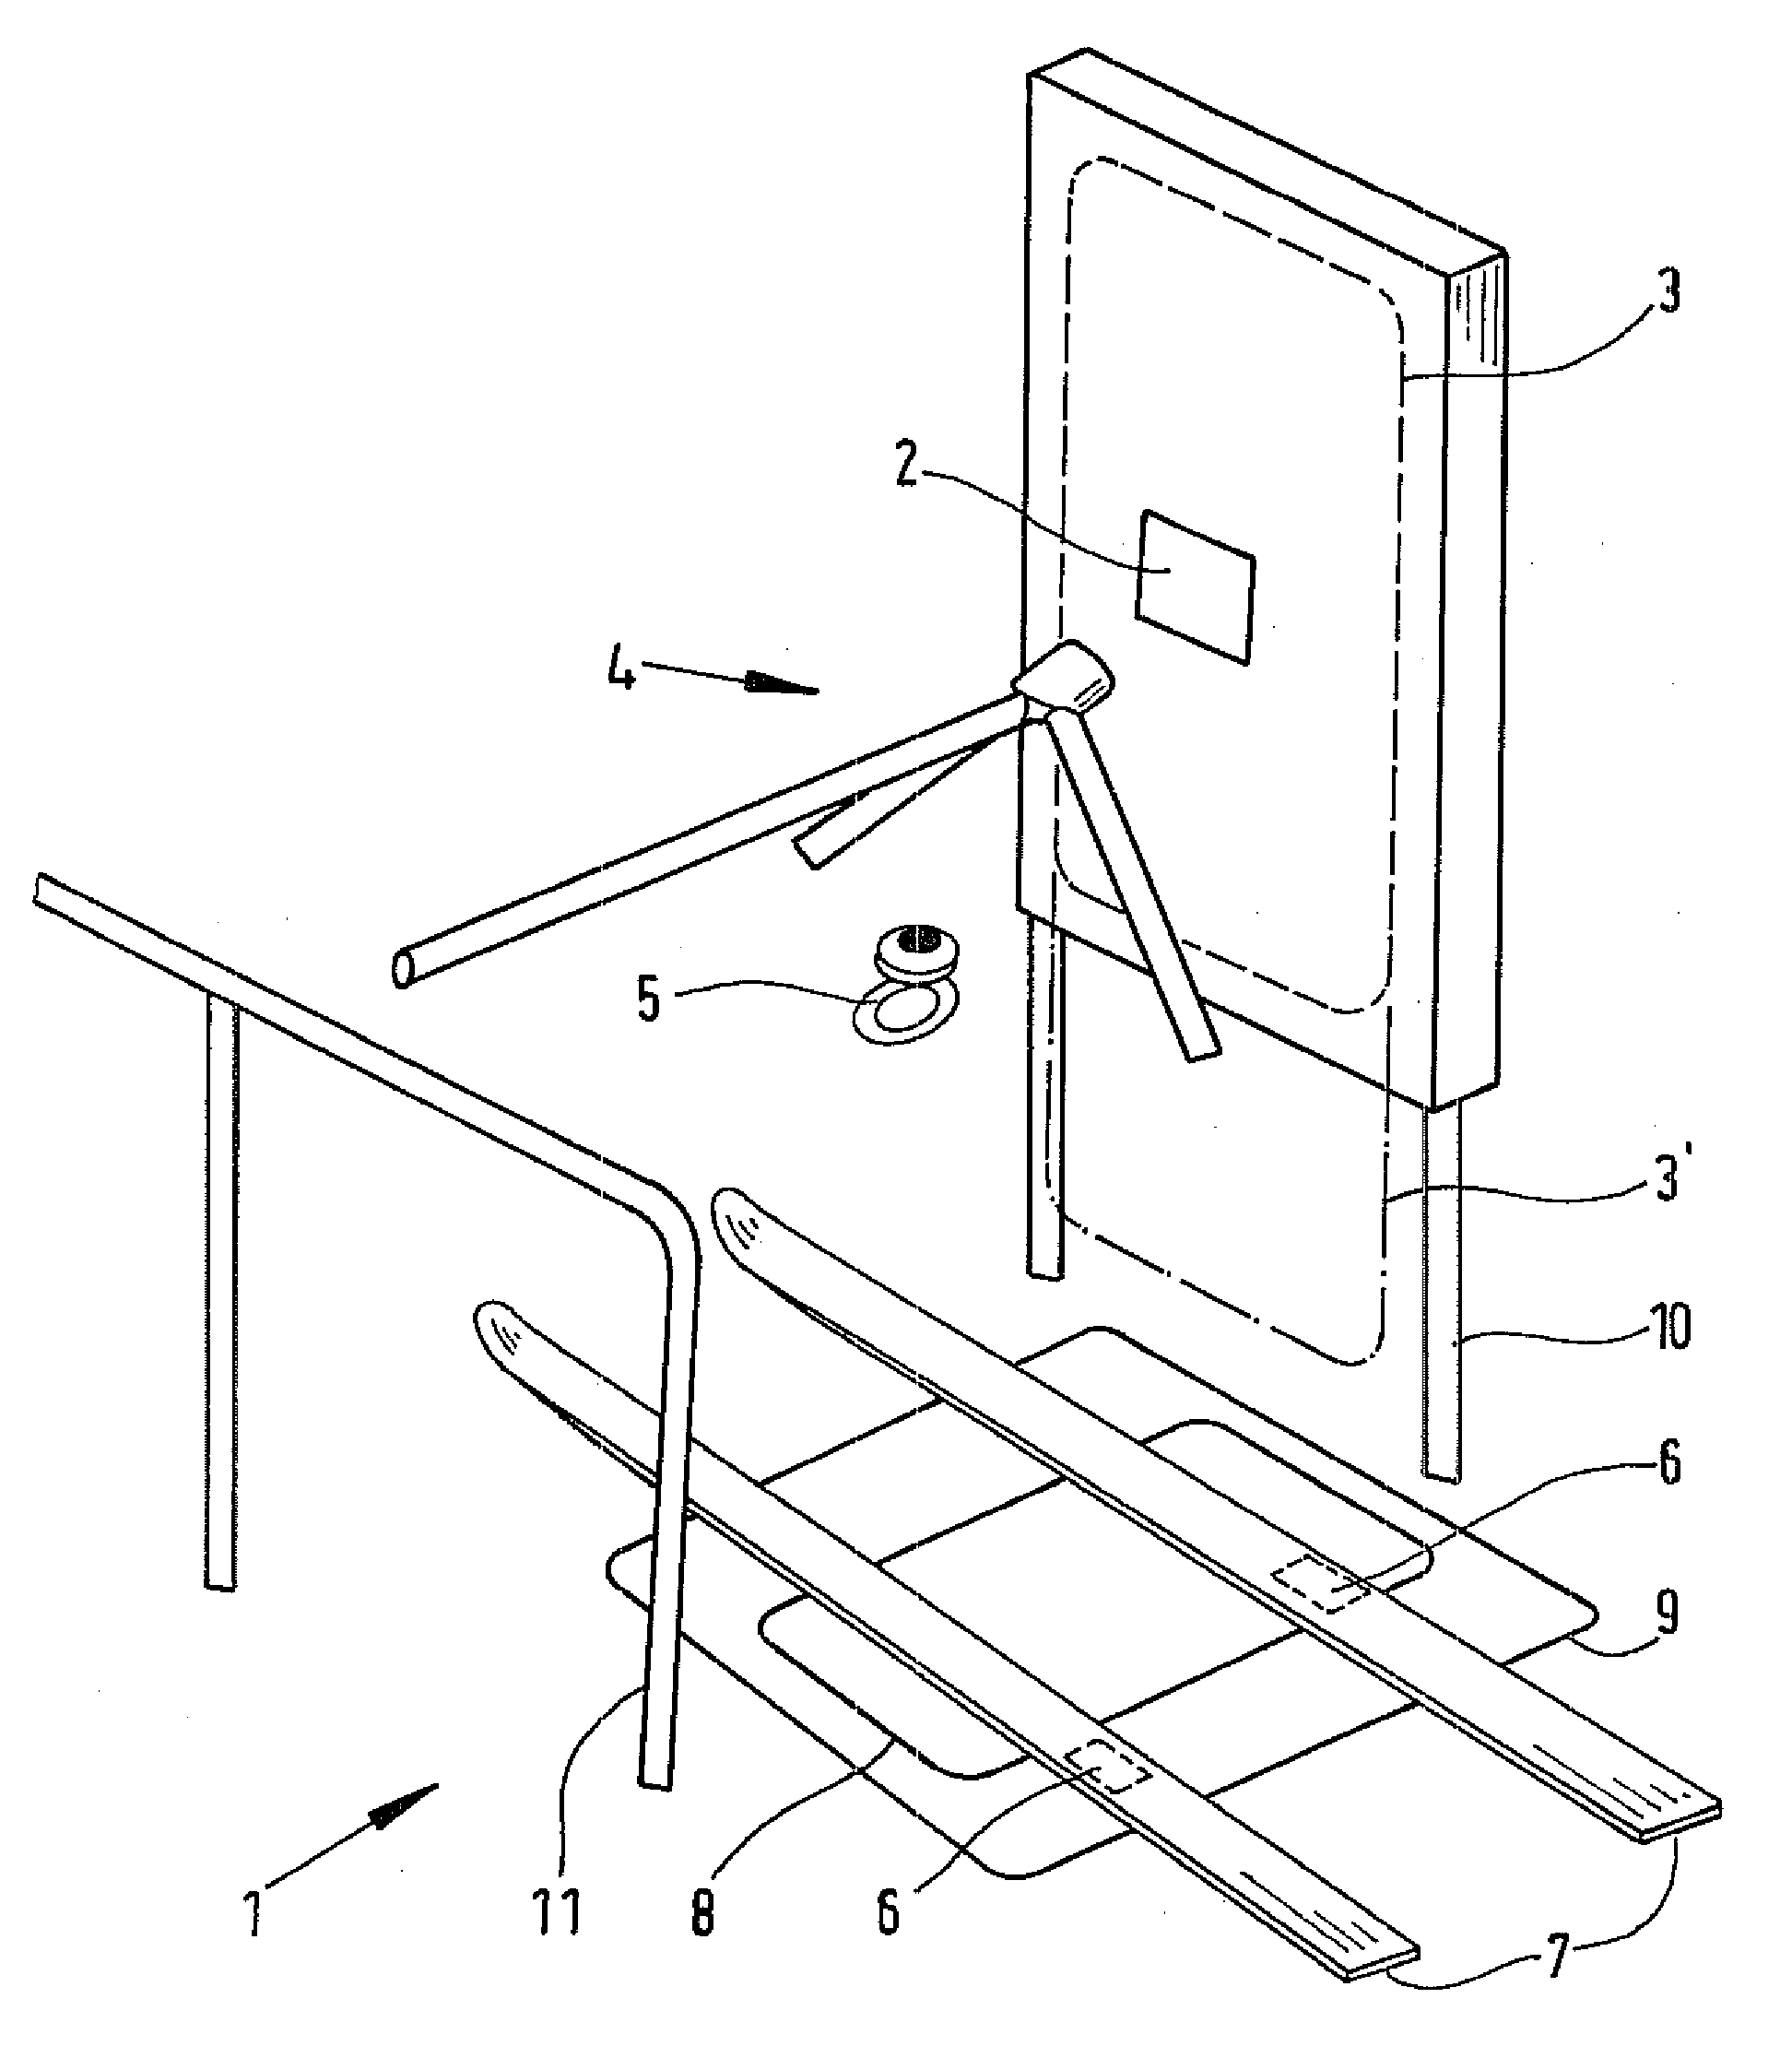 Method of controlling access to a sports facility